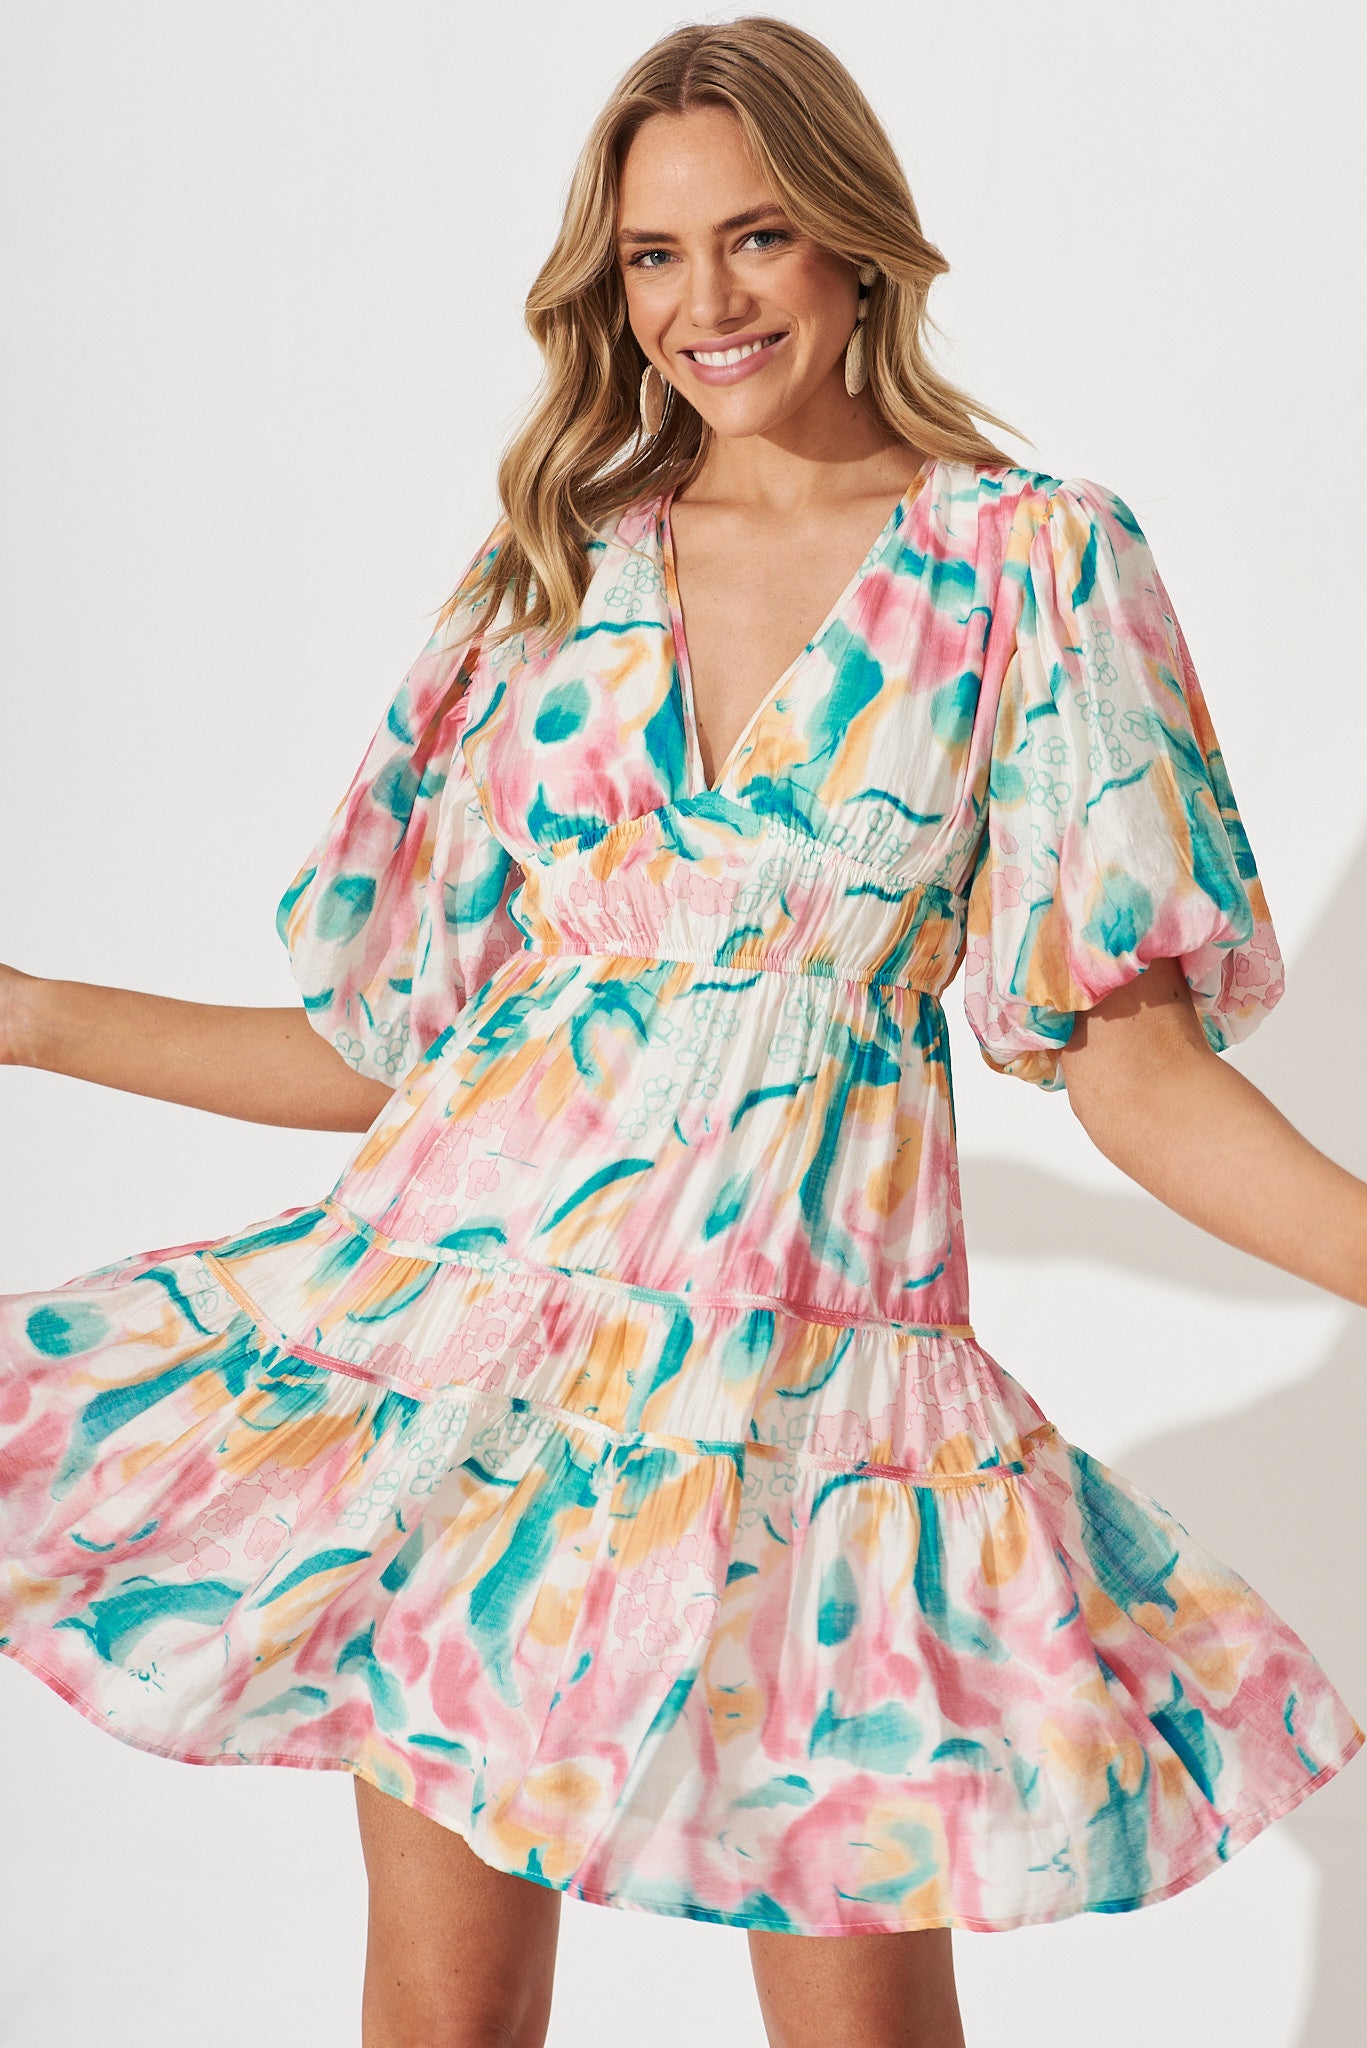 Amarusso Dress In Pink With Multi Watercolour Floral Print - front